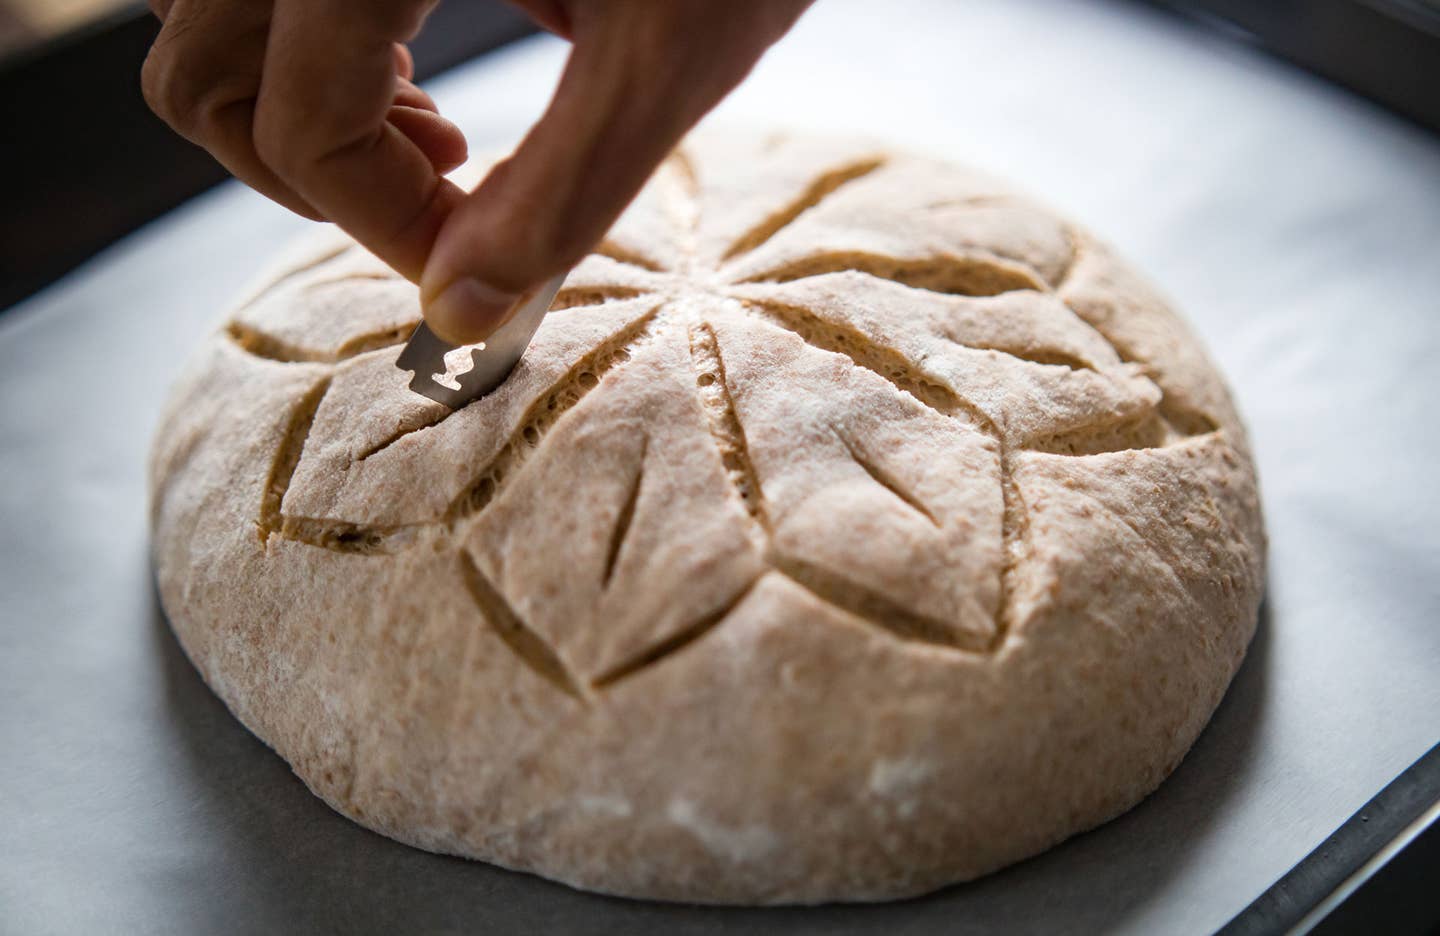 Bread Lames vs. Other Scoring Tools: Pros and Cons